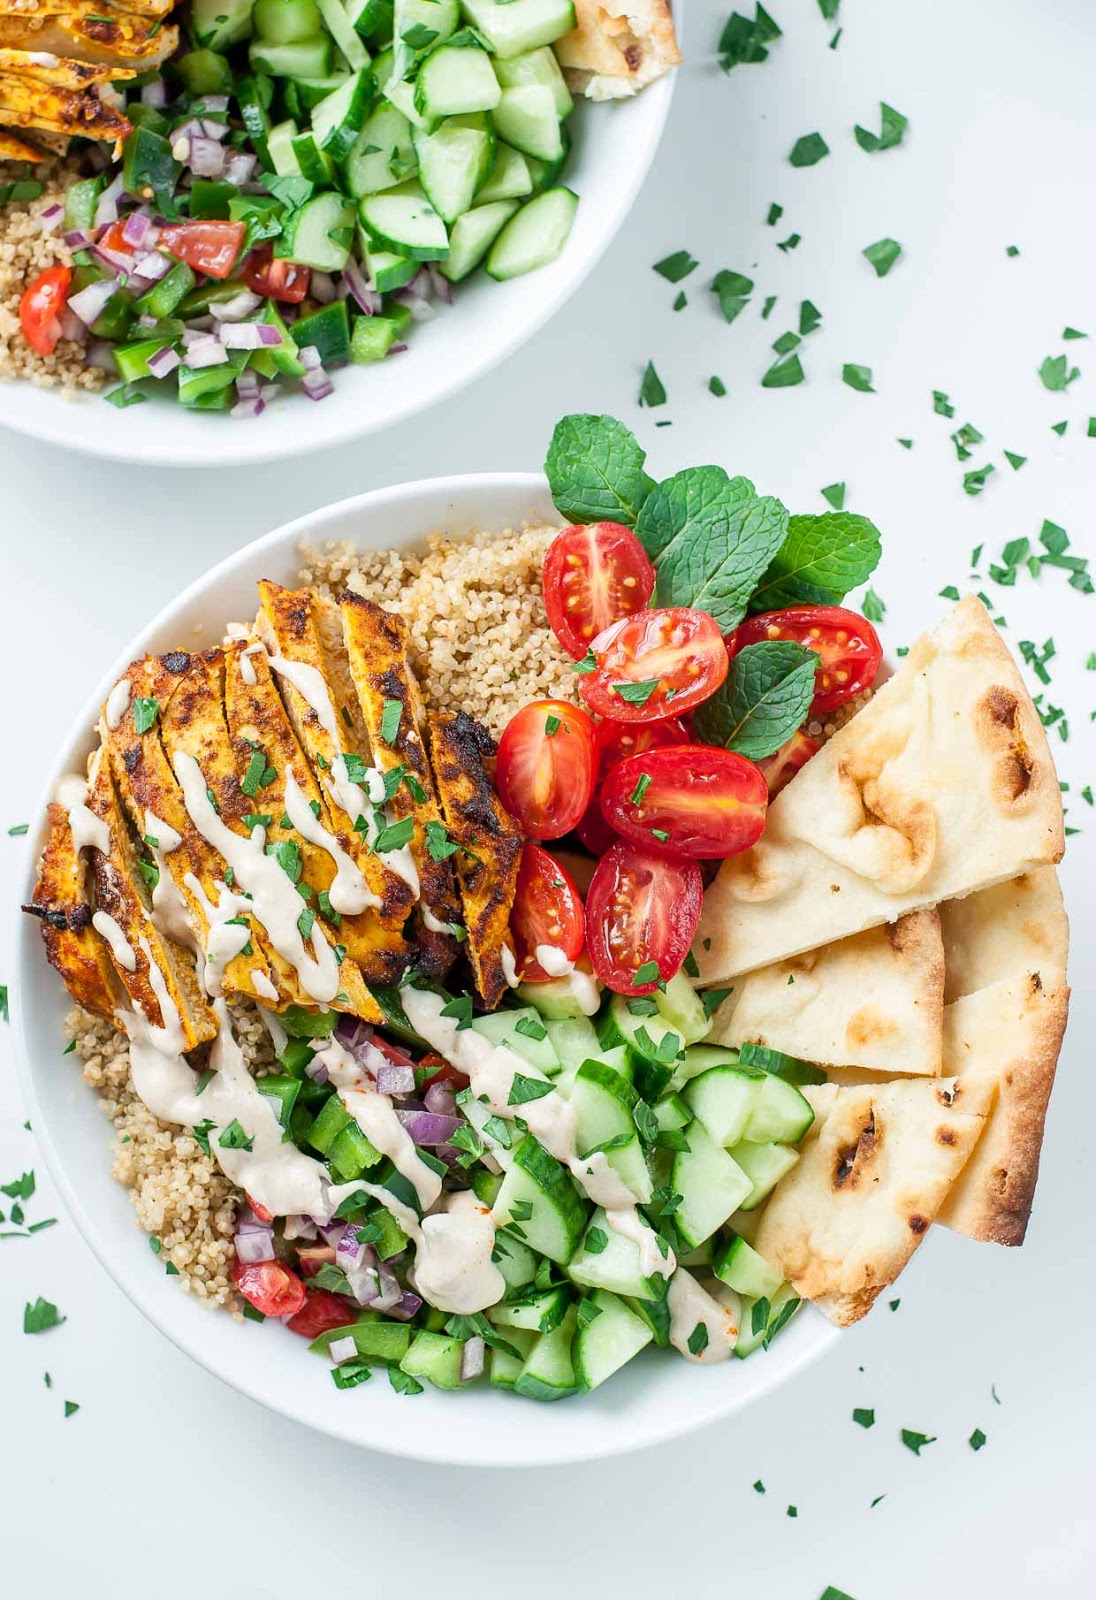 Healthy Chicken Shawarma Quinoa Bowls - Healthy Chicken Shawarma Quinoa Bowls with a super easy hack for creating make-ahead lunches for work or school. The flavors are out of this world!!